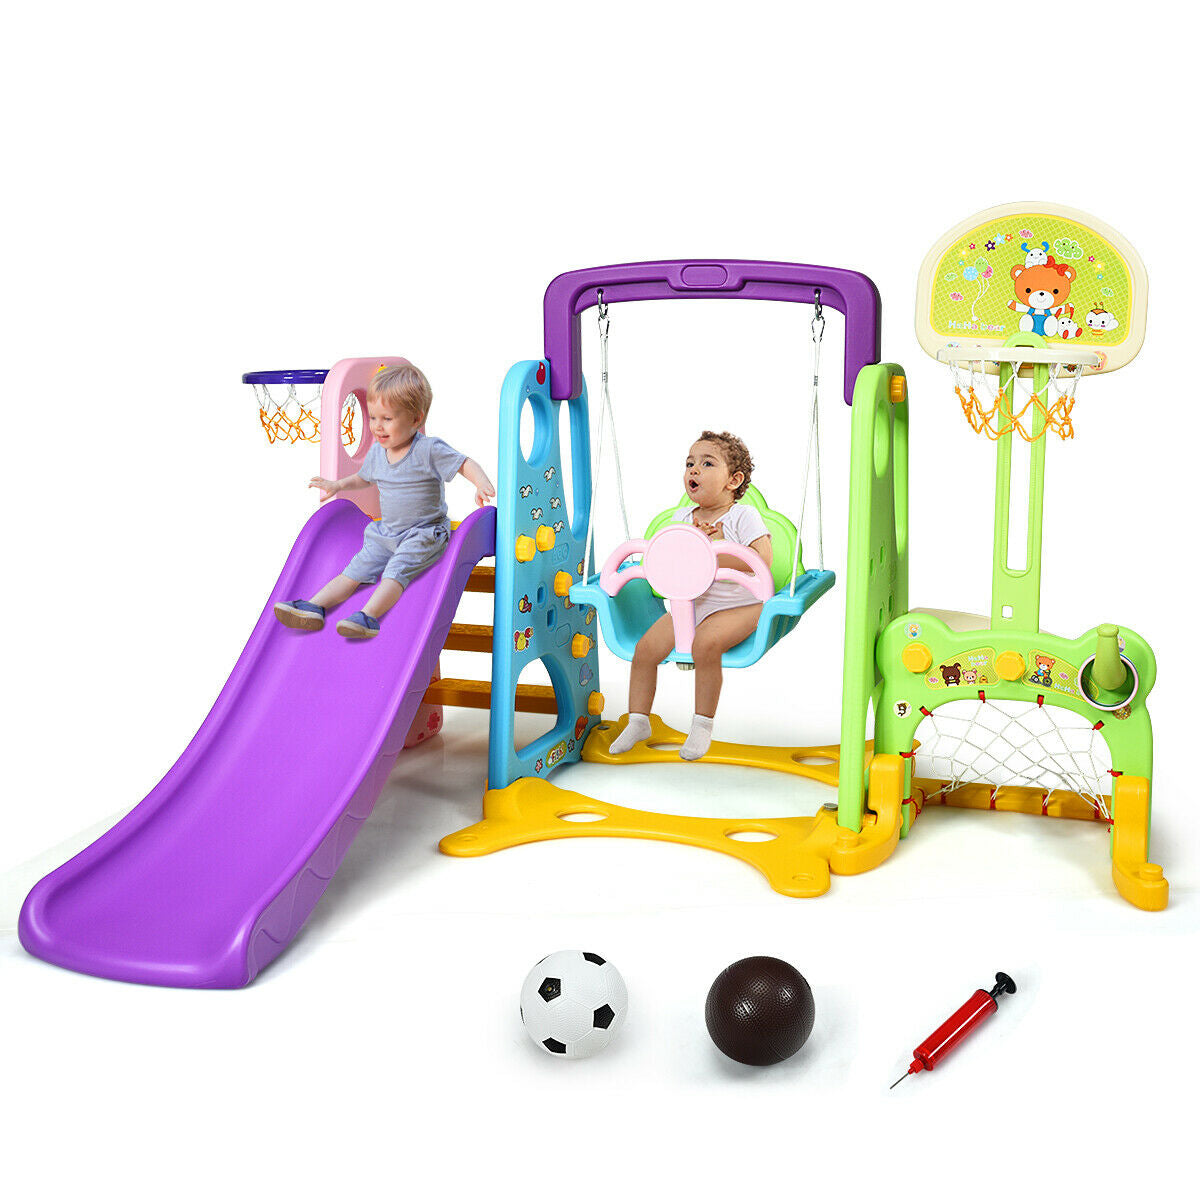 6 In 1 Toddler Playset: Includes a swing, basketball hoop, football gate, slide, ringtoss, and a writing zone, promoting healthy bone growth, coordination, and balance in children.